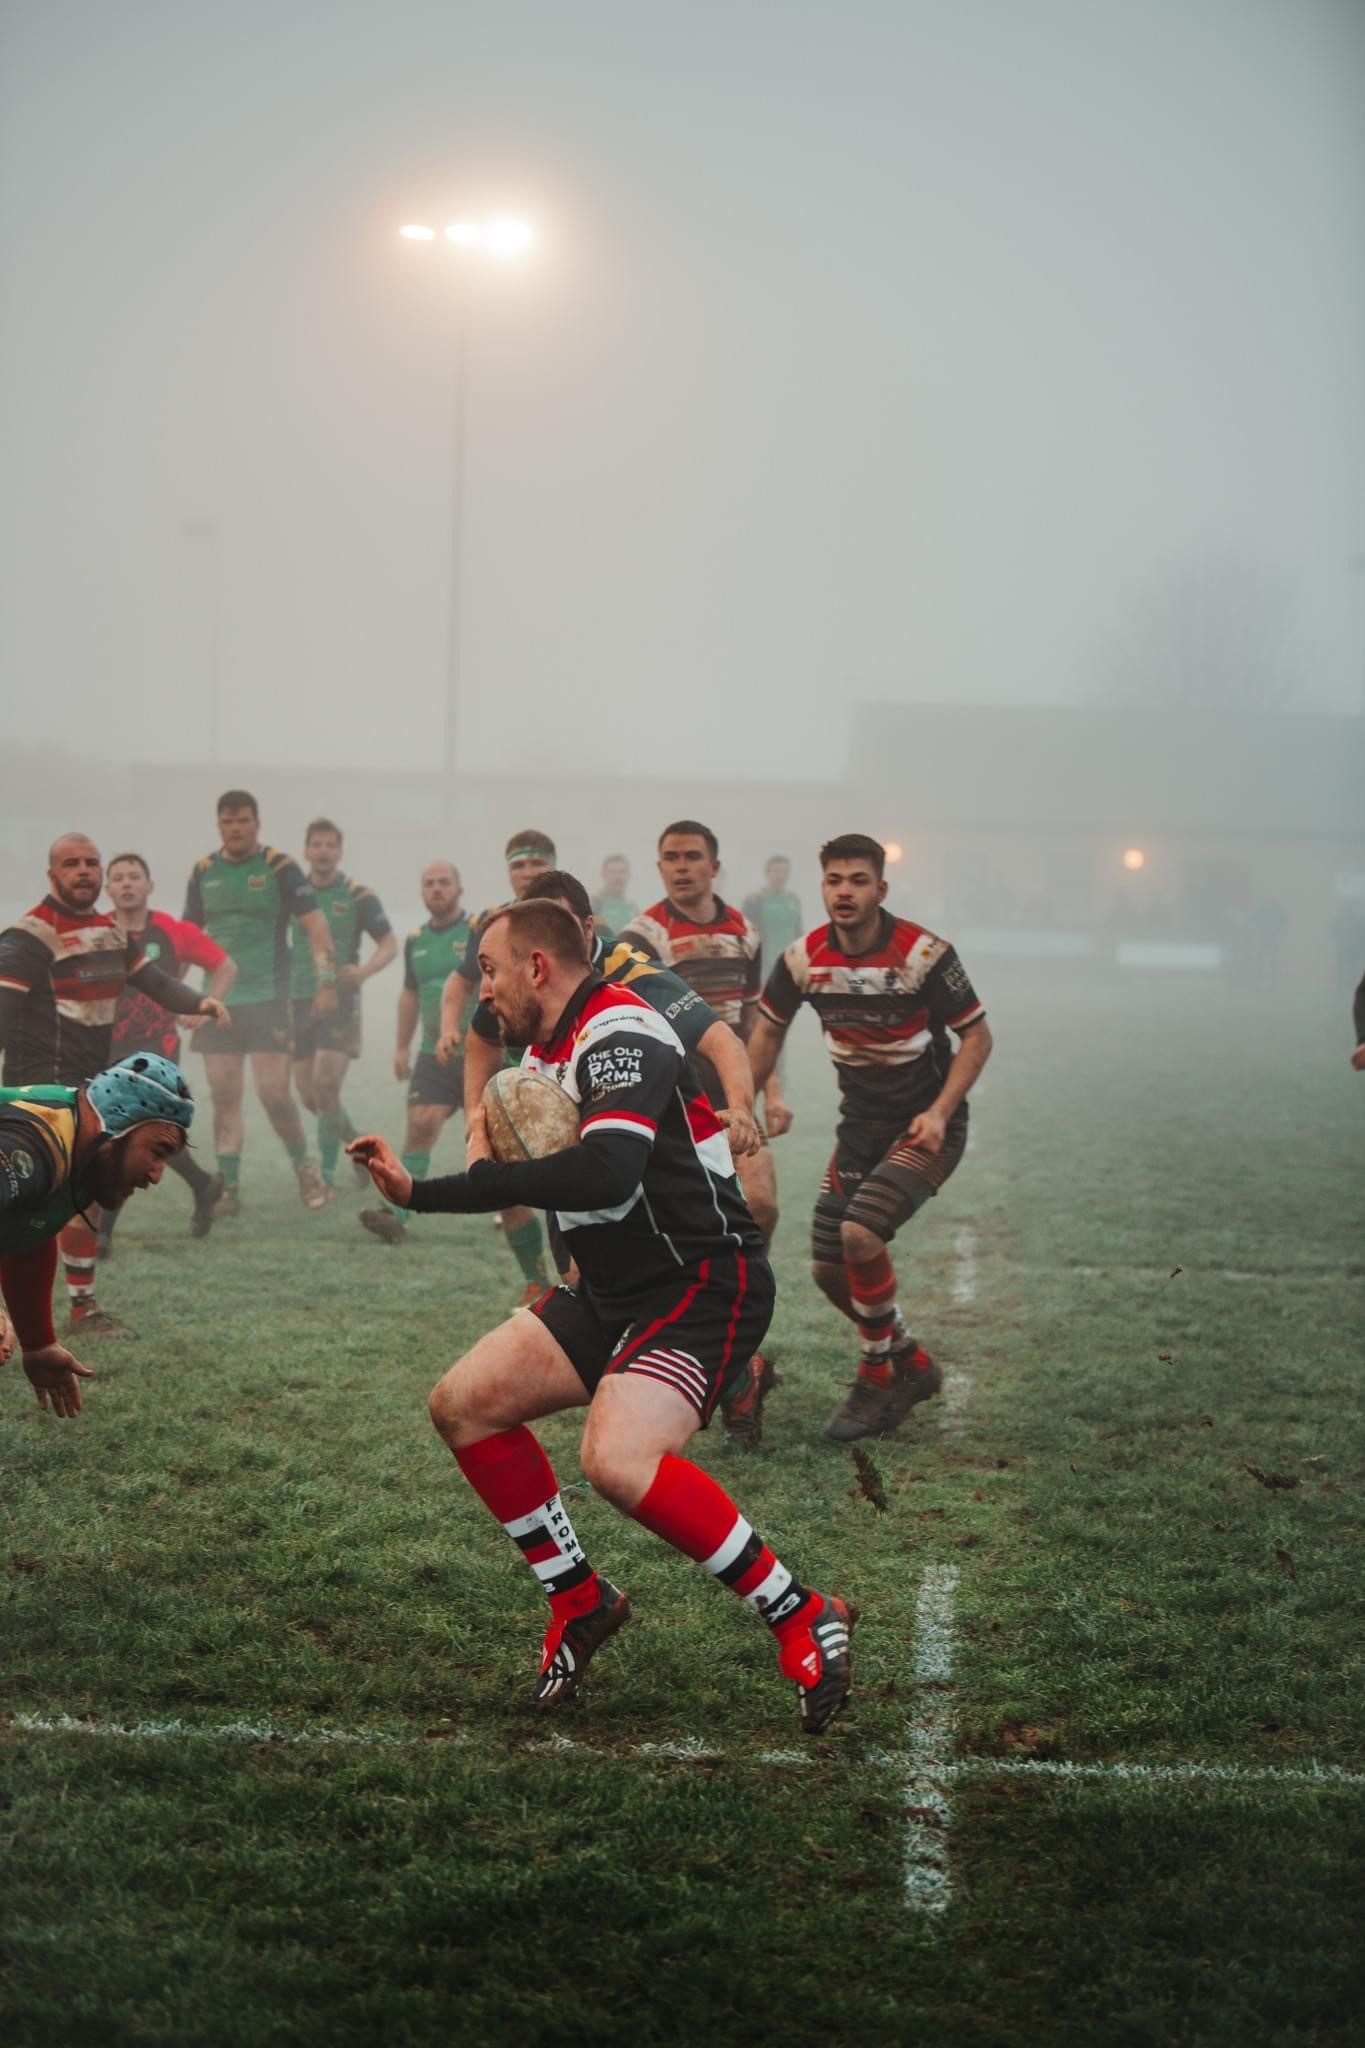 Incredible Frome rugby photos : Nick Perry